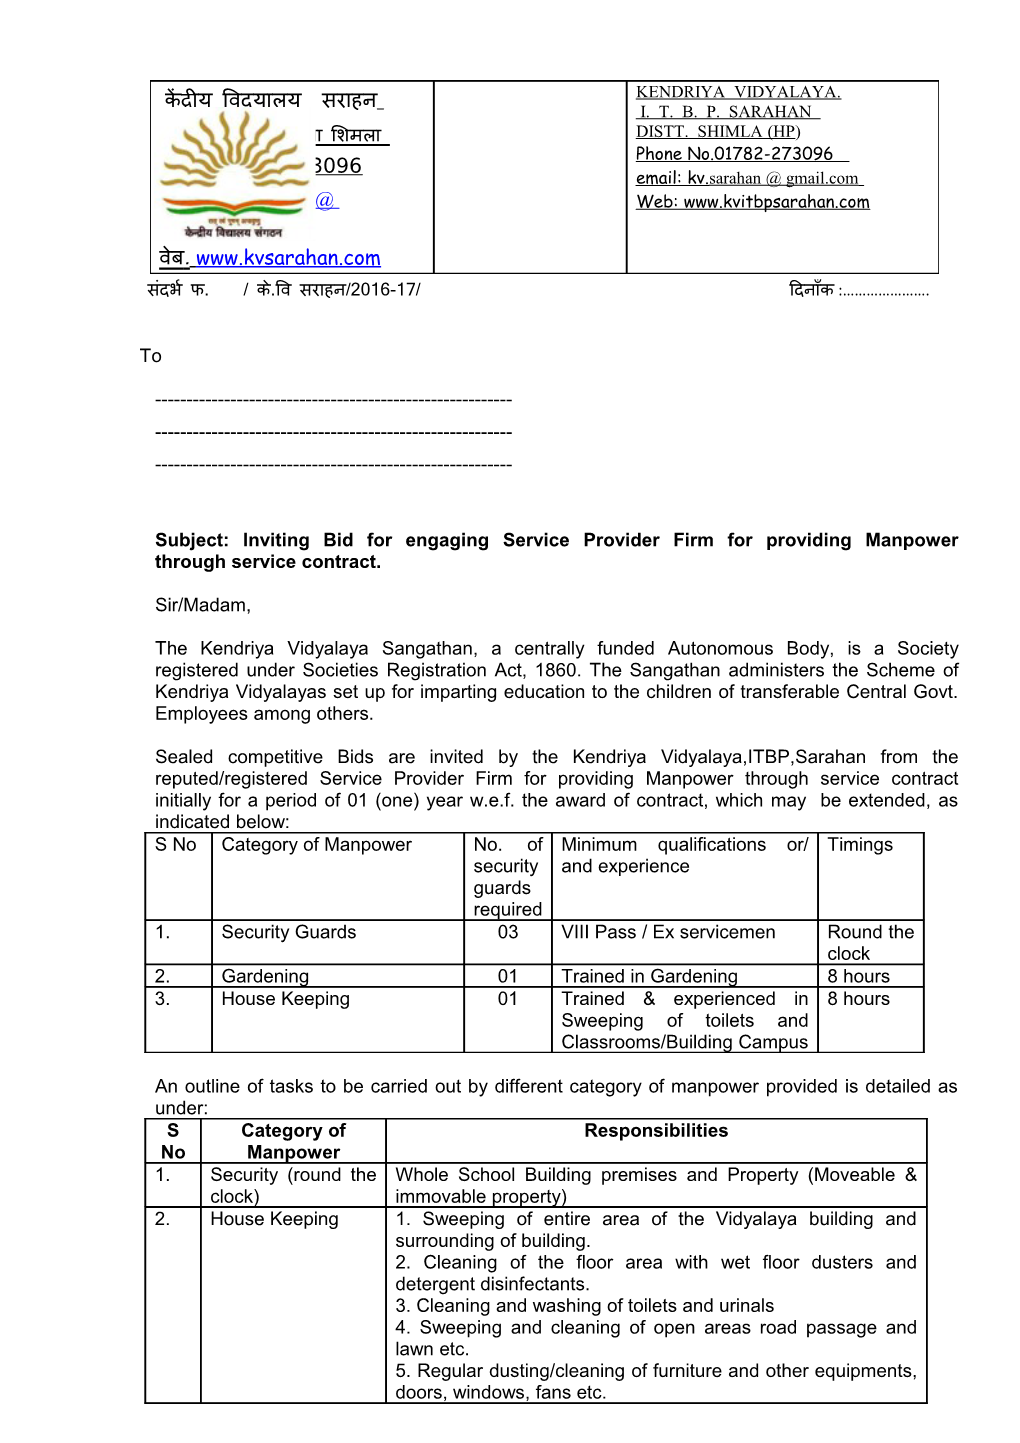 Subject: Inviting Bid for Engaging Service Provider Firm for Providing Manpower Through